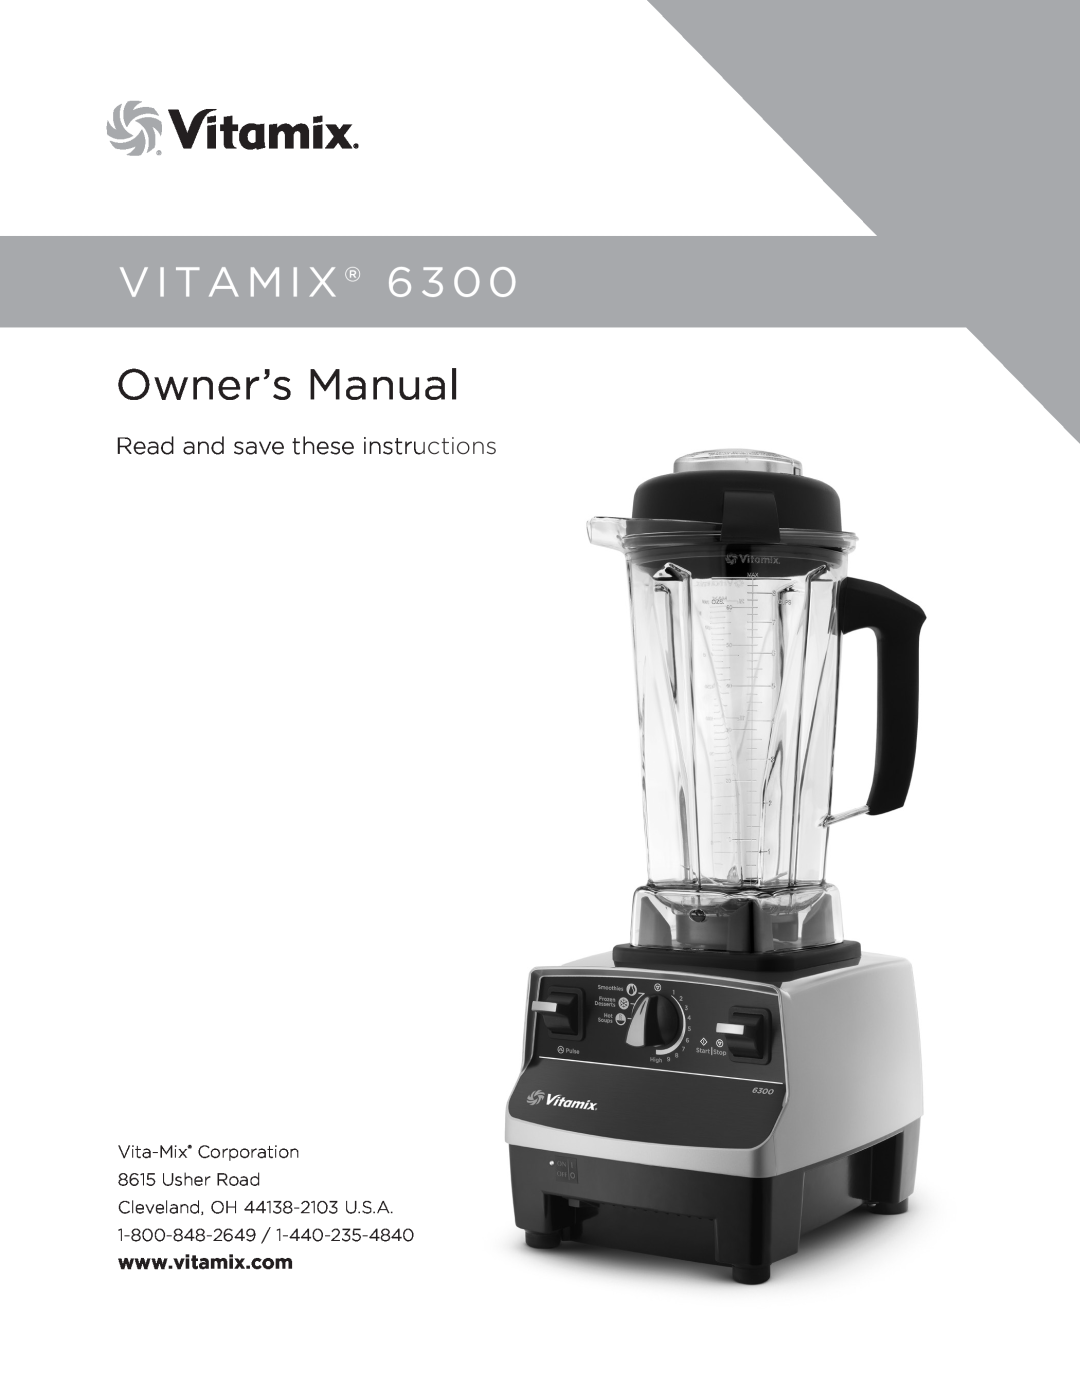 Vita-Mix 6300 owner manual Read and save these instructions, Vitamix 